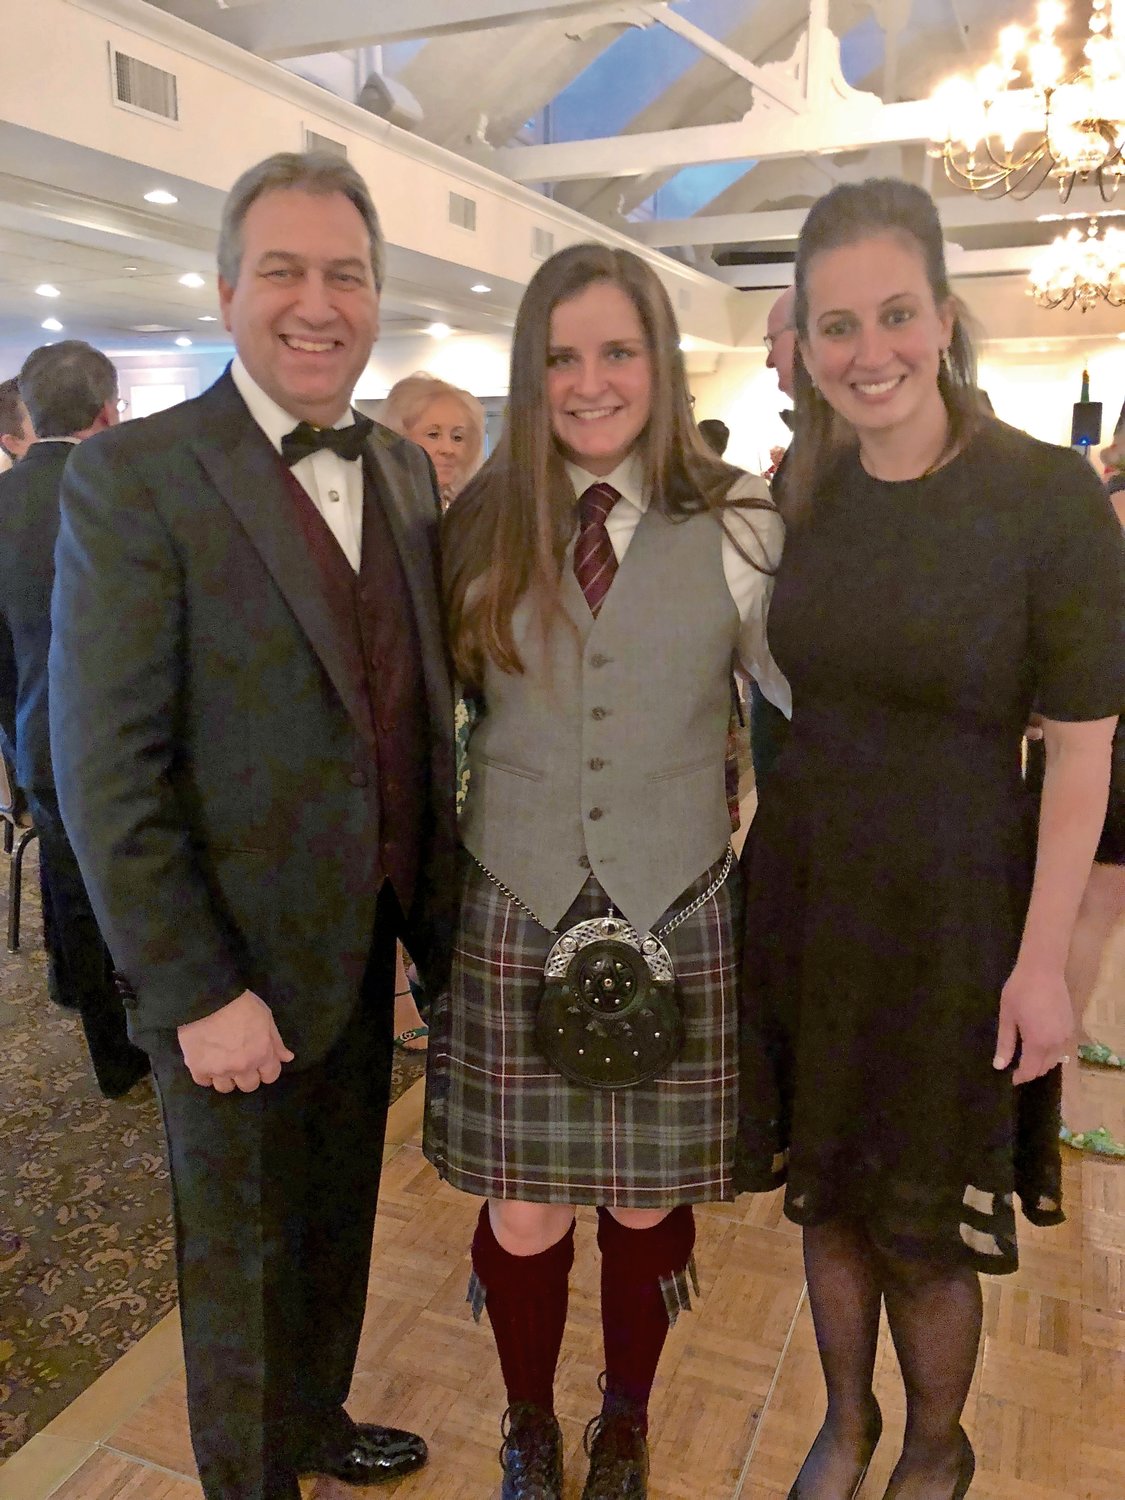 Erin McGrath, center, was invited by Molloy College President Drew Bogner and Vice President of Student Affairs Janine Payton to create a pipe band on campus.